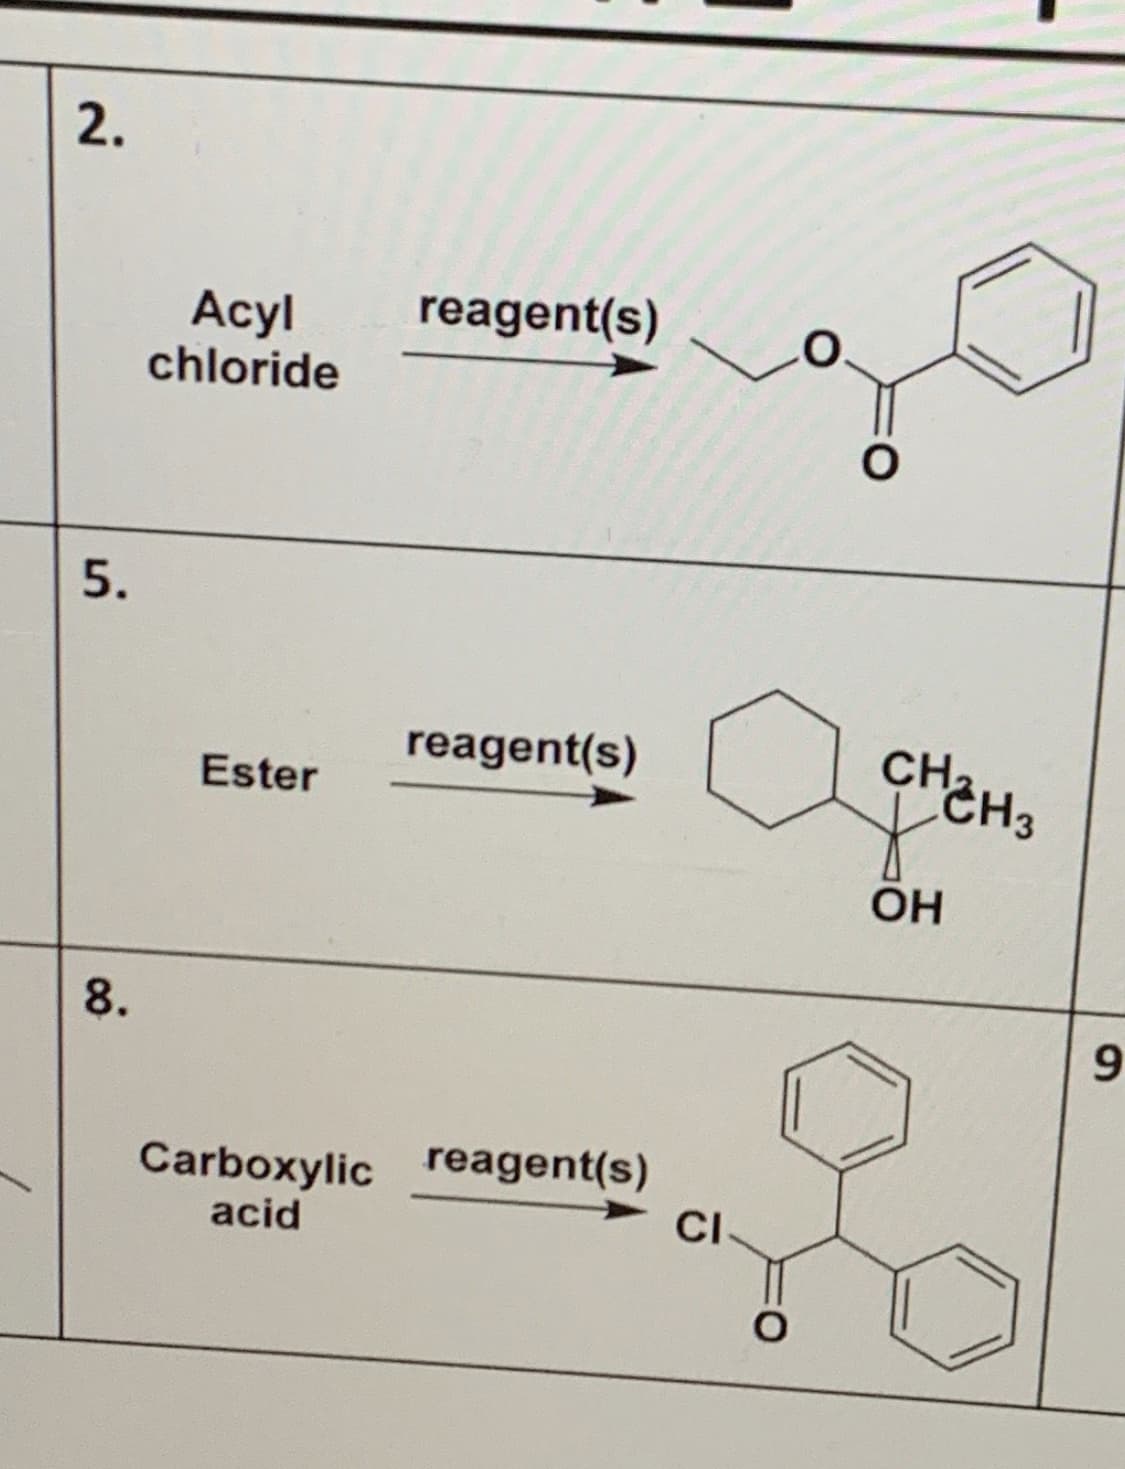 2.
reagent(s)
Acyl
chloride
5.
reagent(s)
CHEH3
Ester
ОН
8.
Carboxylic reagent(s)
acid
CI
9.
